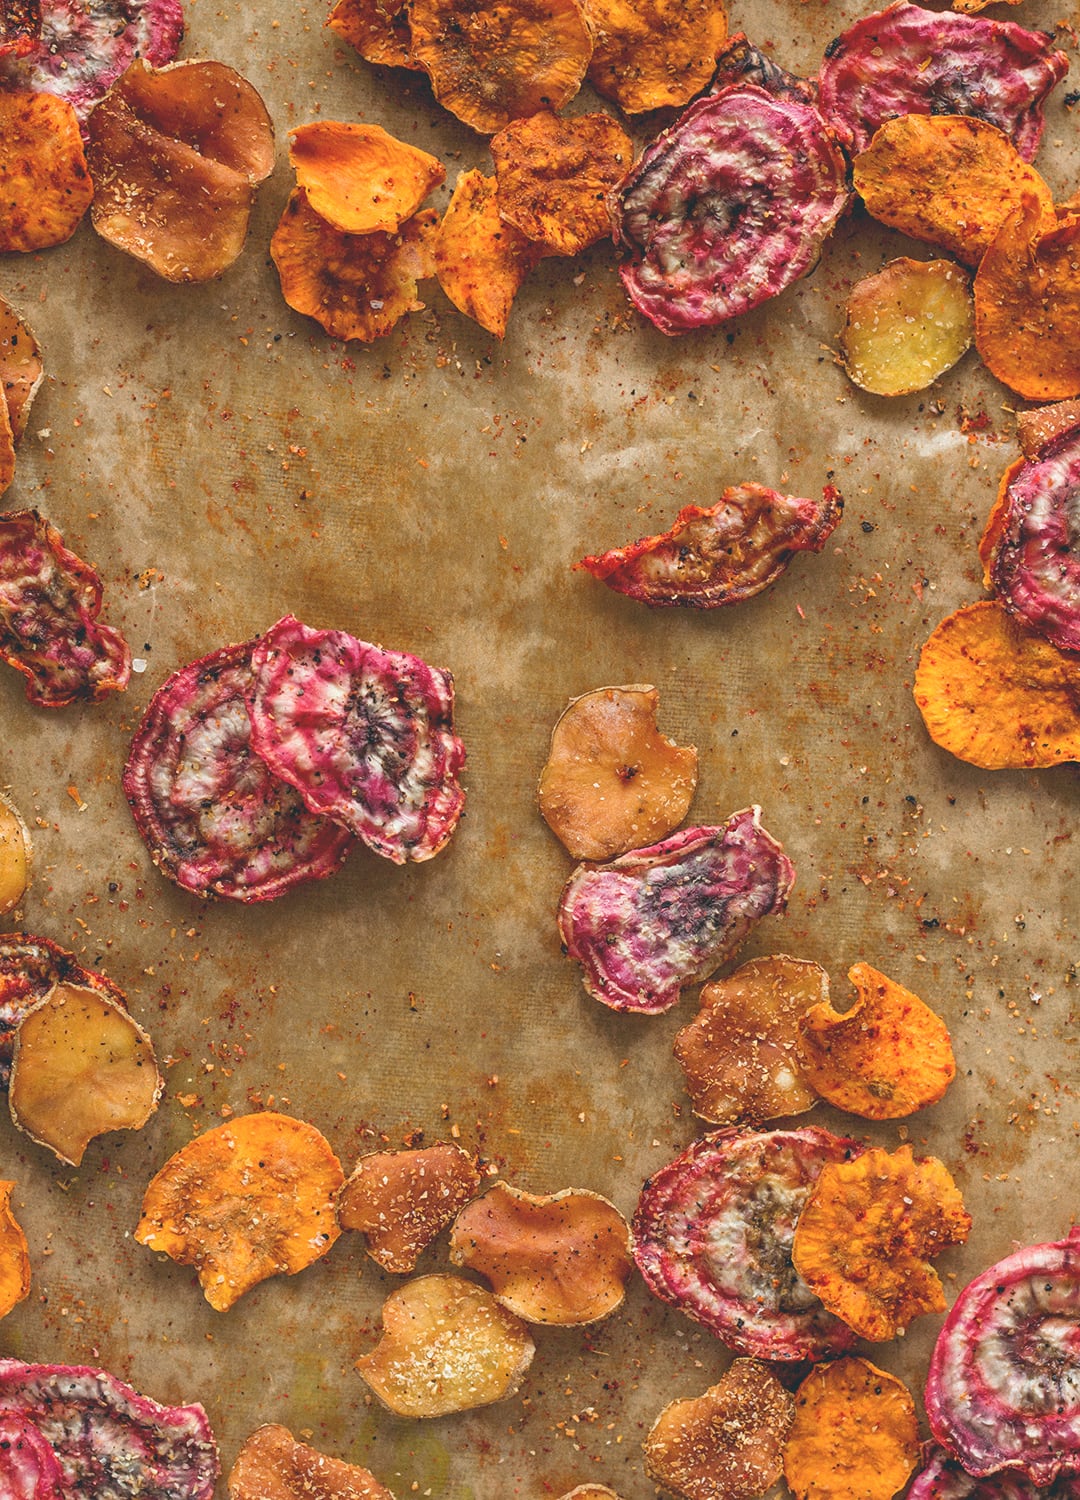 Oven Baked Veggie Chips - red, yellow, and pink beets, sweet potatoes, and some regular potatoes is all you need! Plus your favorite seasoning. You'll absolutely love these. Crunchy & delicious. | thehealthfulideas.com